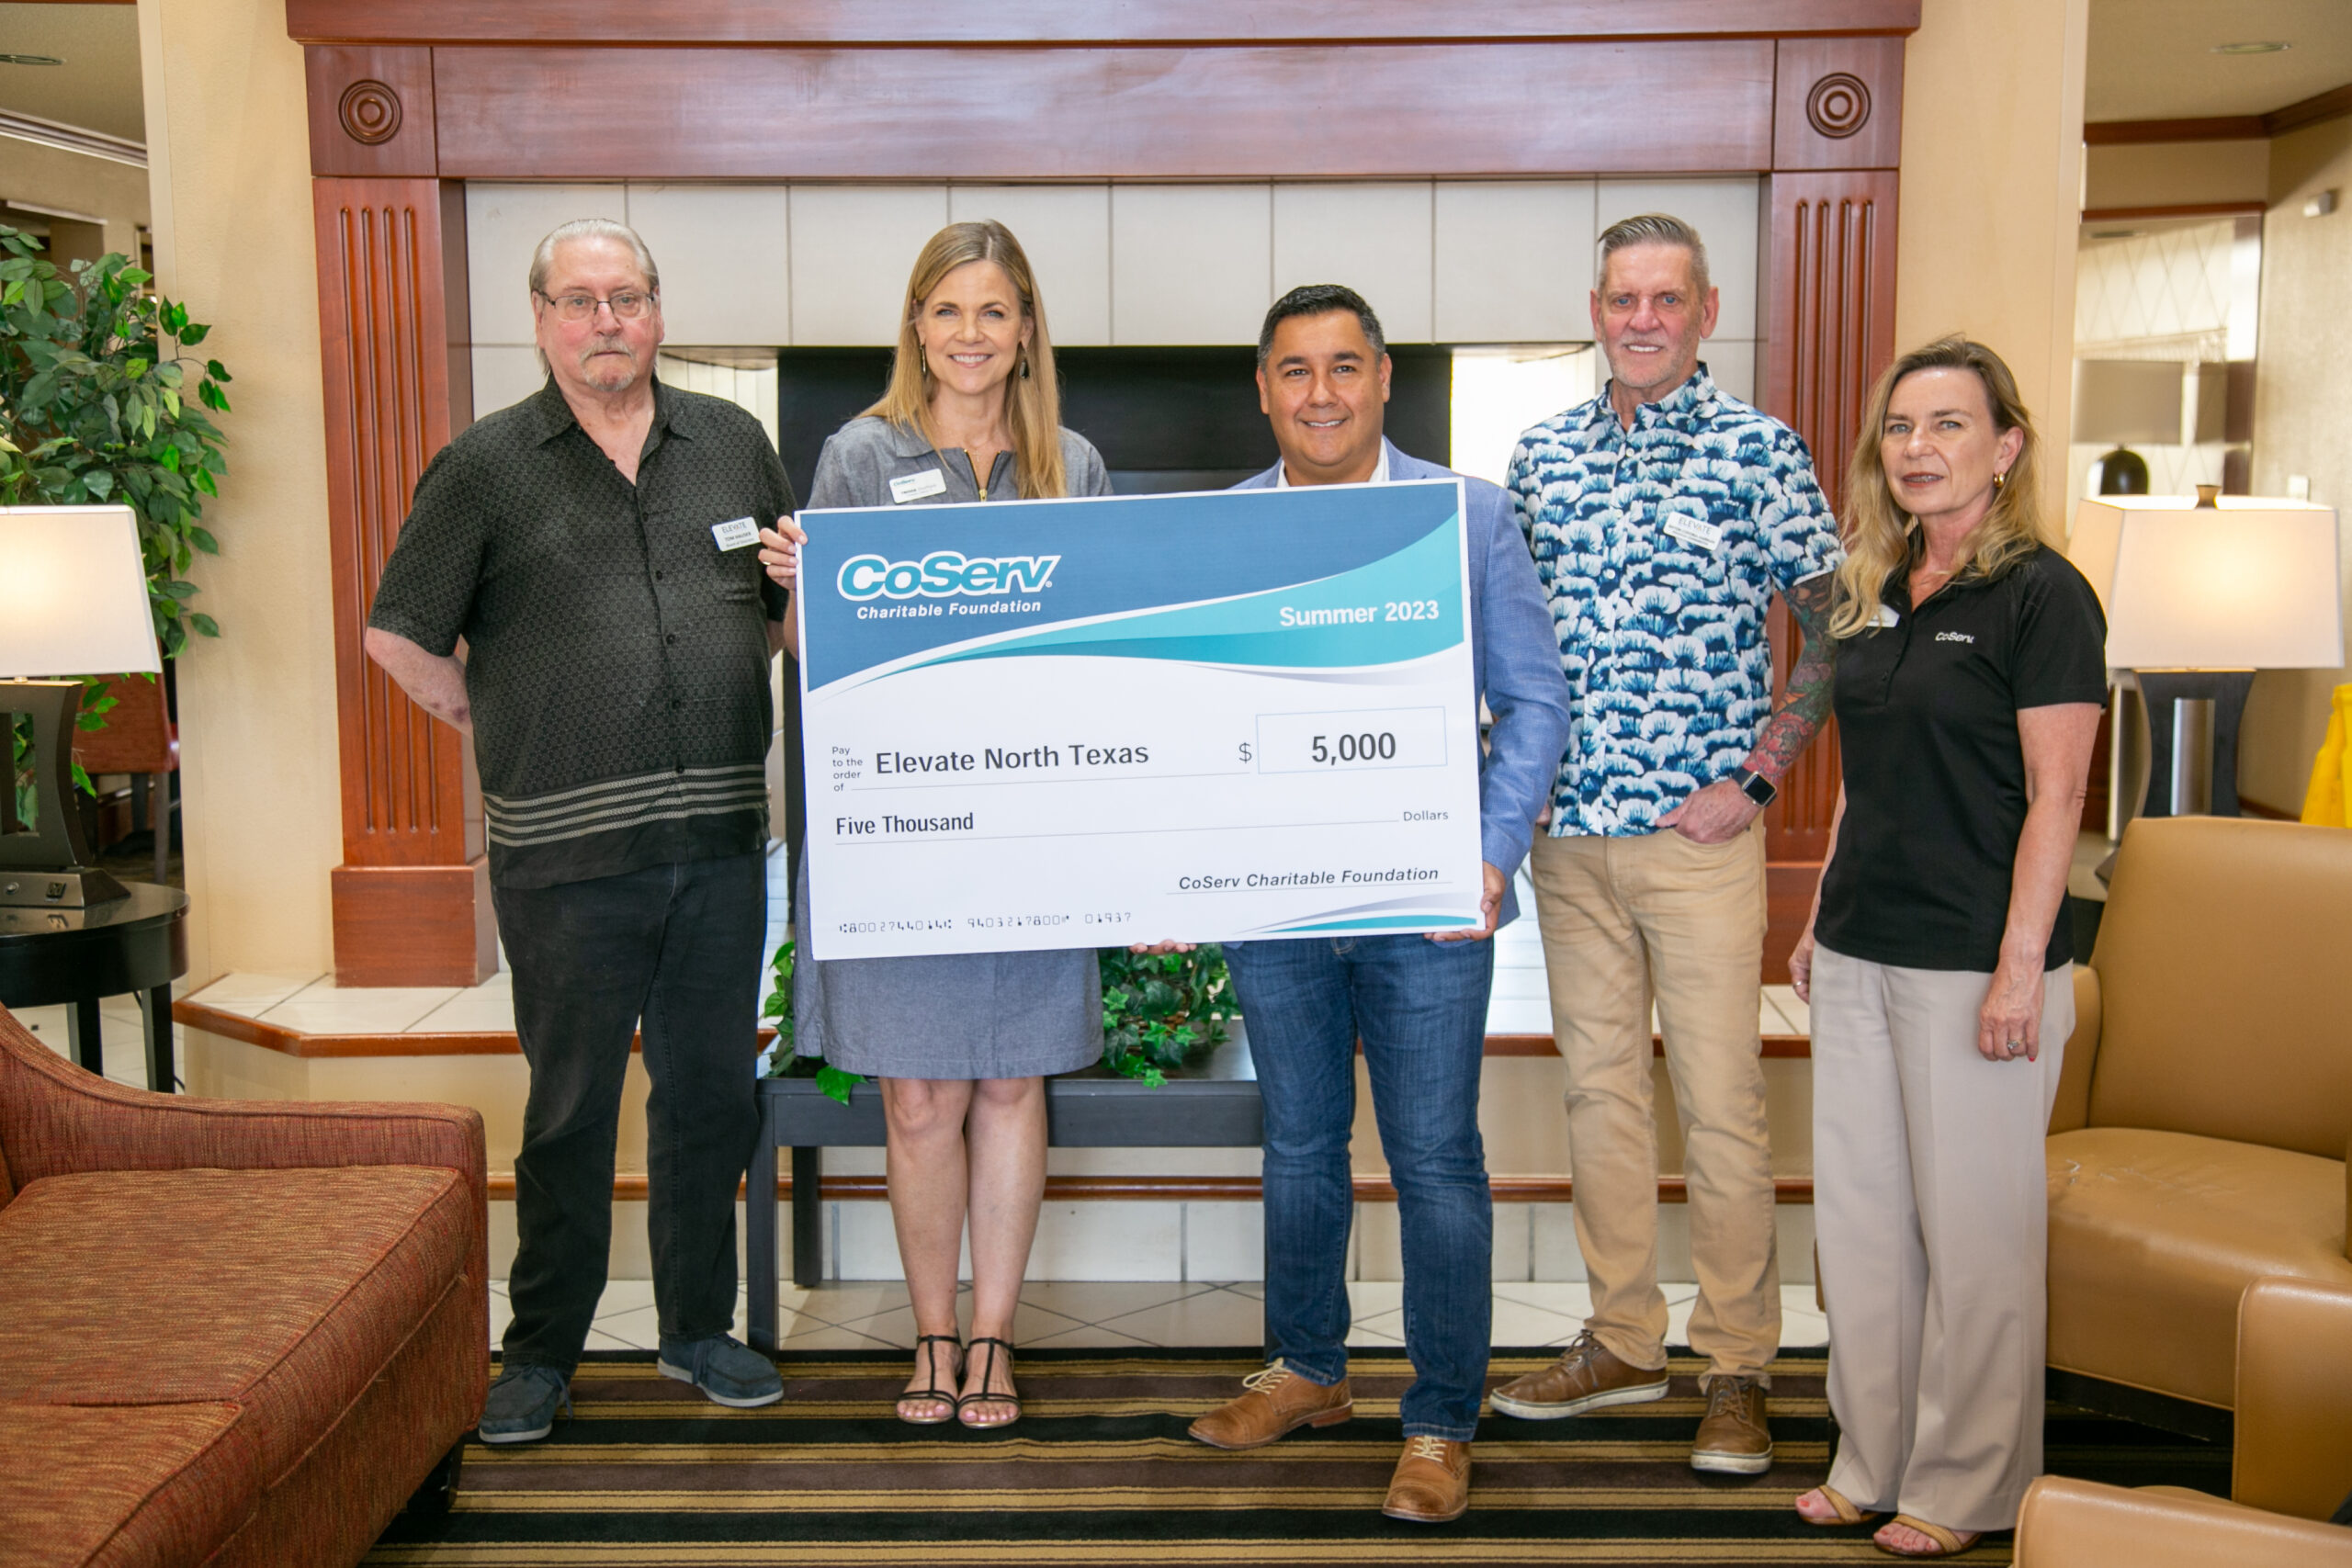 The CoServ Charitable Foundation awarded a grant to Elevate North Texas. 